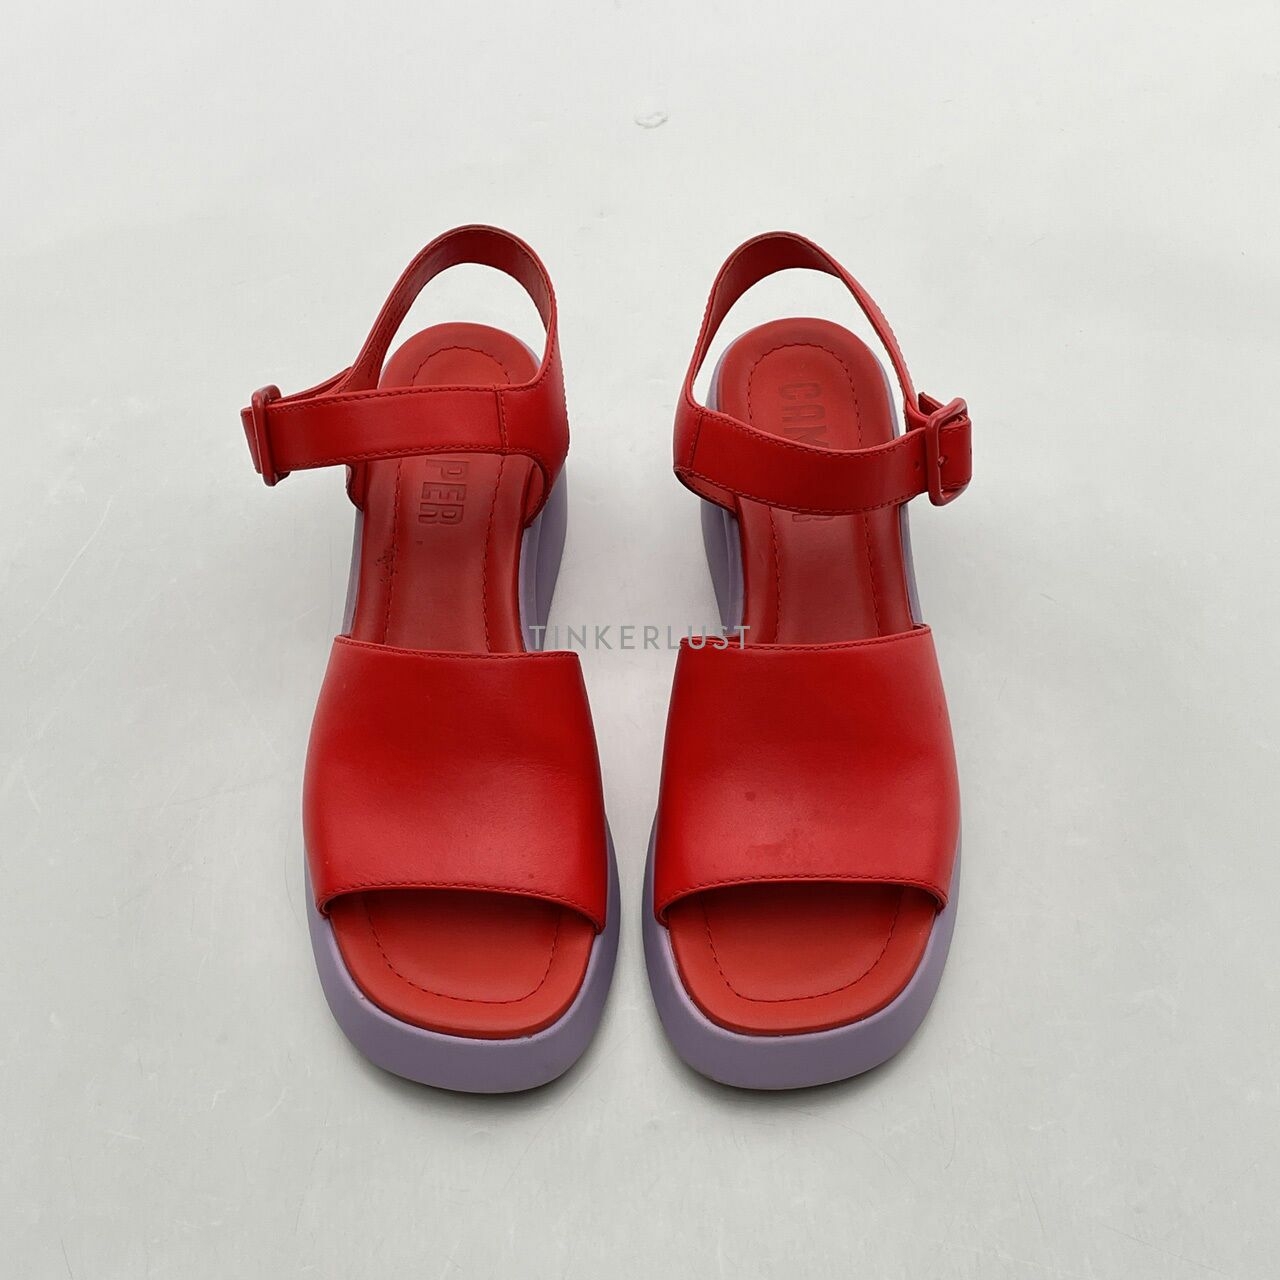 Camper Red & Lilac Wedges